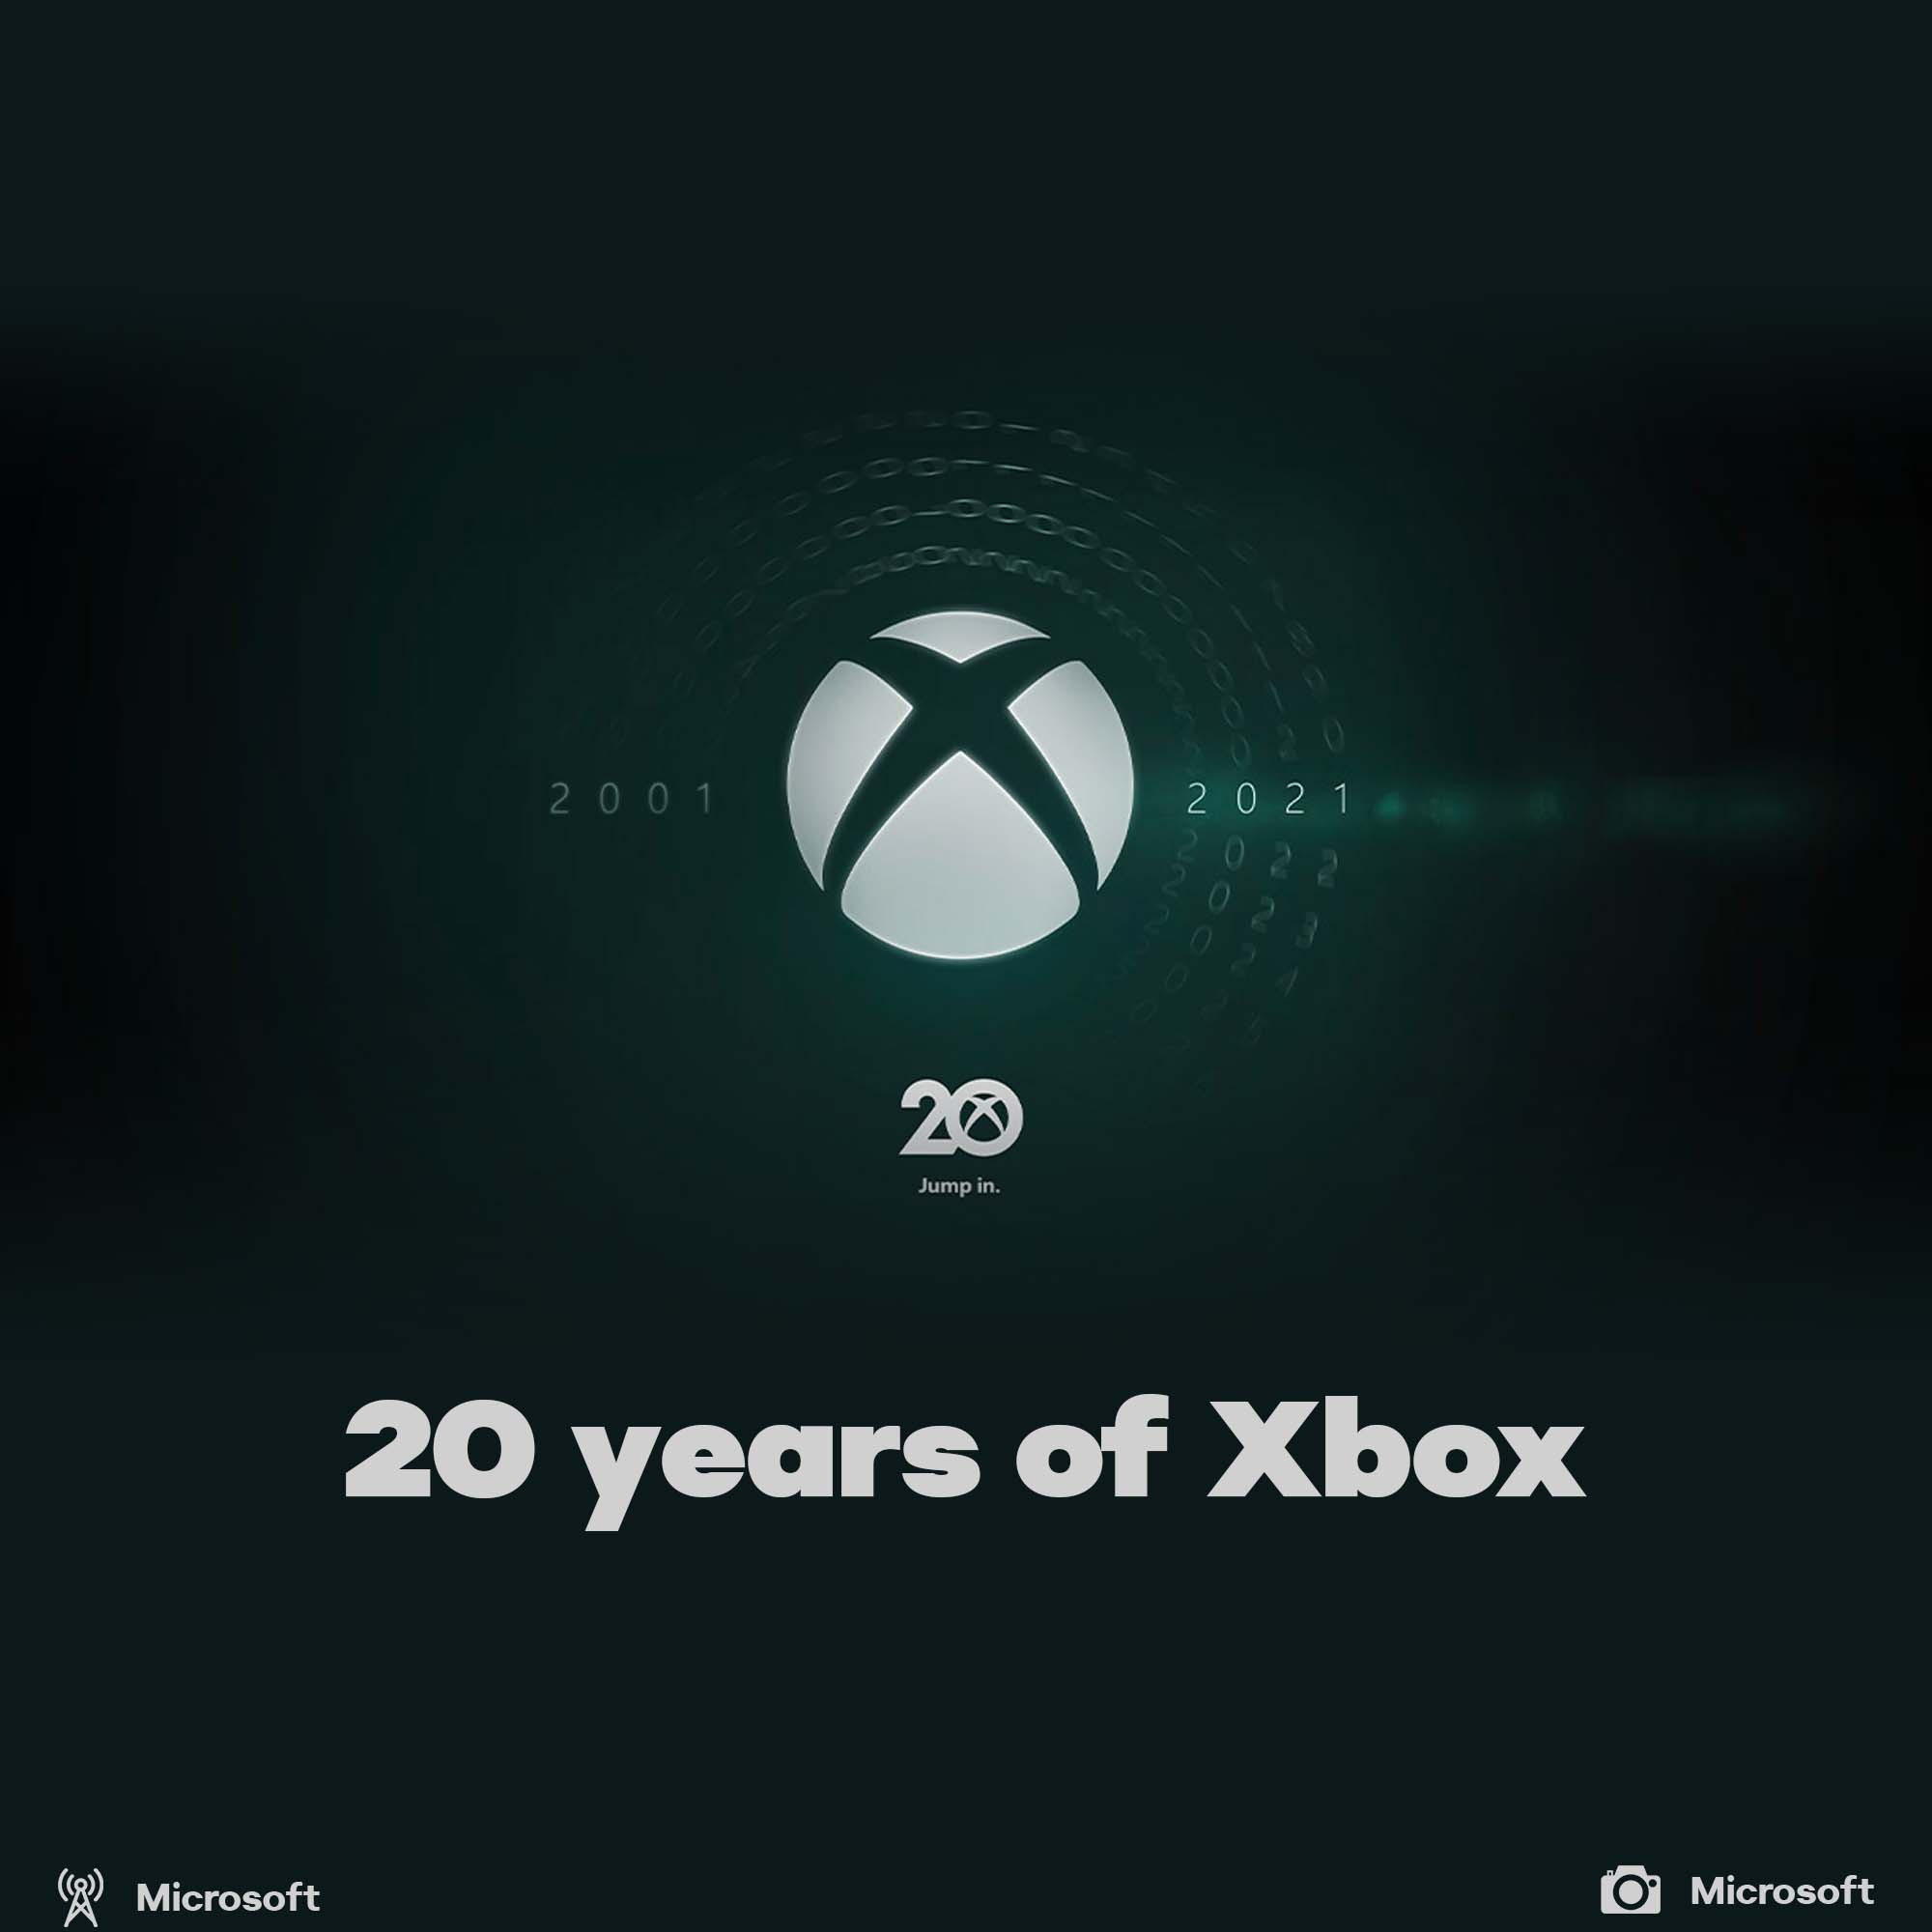 Xbox is 20 years-old